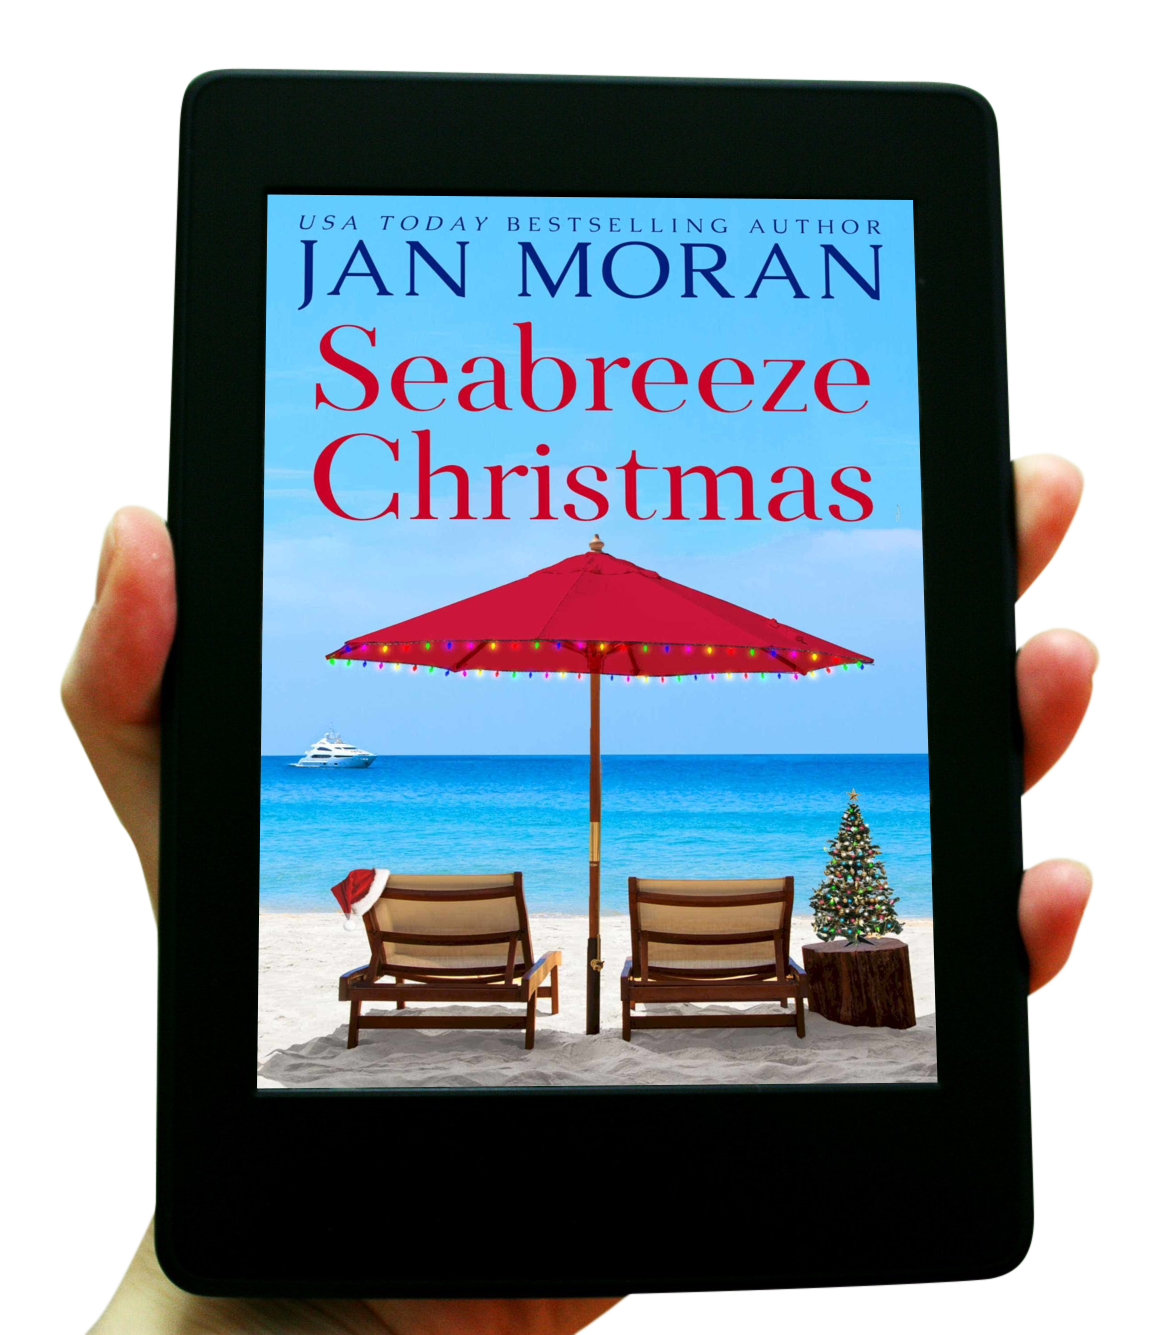 Seabreeze Christmas Ebook Jan Moran Holiday Book, Clean and Wholesome, Women's Fiction, small town, Jan Moran, beach reads, clean, wholesome, clean romance, beach reads ebook, beach reads paperback, Mary Kay Andrews, Debbie Macomber, dating, beach saga, summer read, vacation, women, dating, love, romance, romantic, chick lit, fun, womens fiction, beach, holiday, friendship, relationships, California, Elin Hilderbrand, Mary Alice Monroe